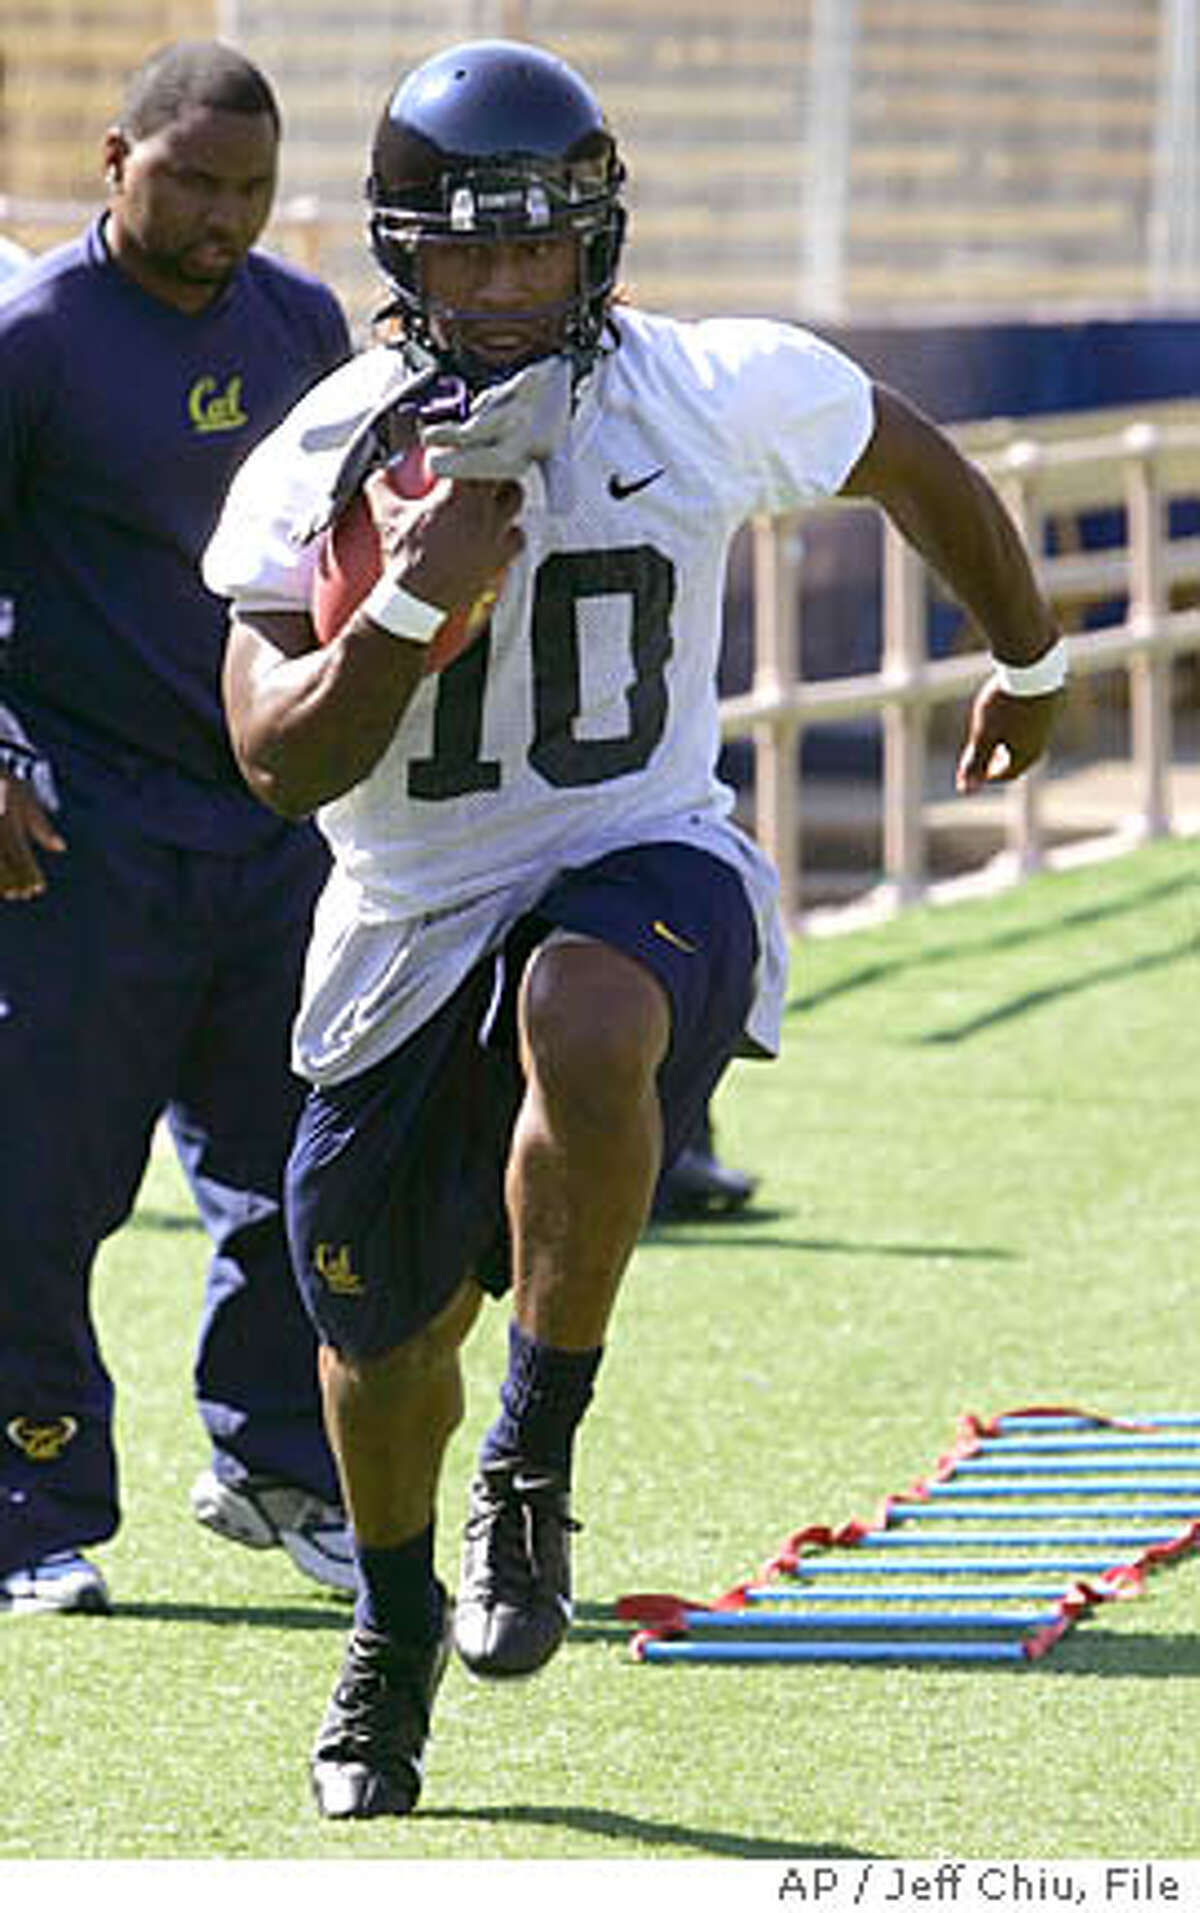 **ADVANCE FOR SUNDAY, AUG. 13 ** California running back Marshawn Lynch runs a drill during football practice in Berkeley, Calif., Tuesday, Aug. 8, 2006. (AP Photo/Jeff Chiu)